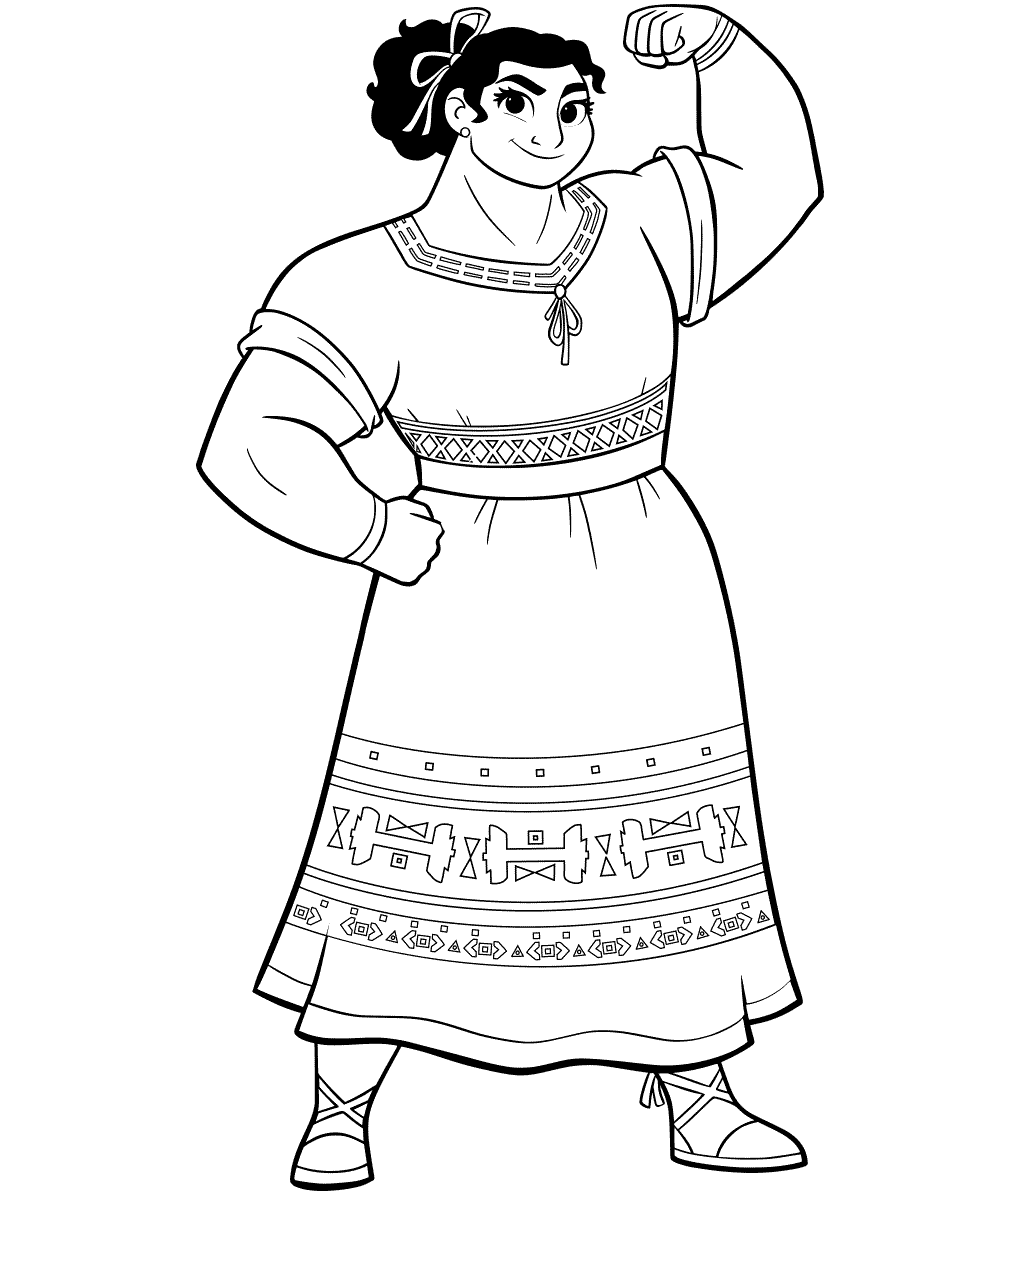 Strong Luisa Madrigal Coloring Page